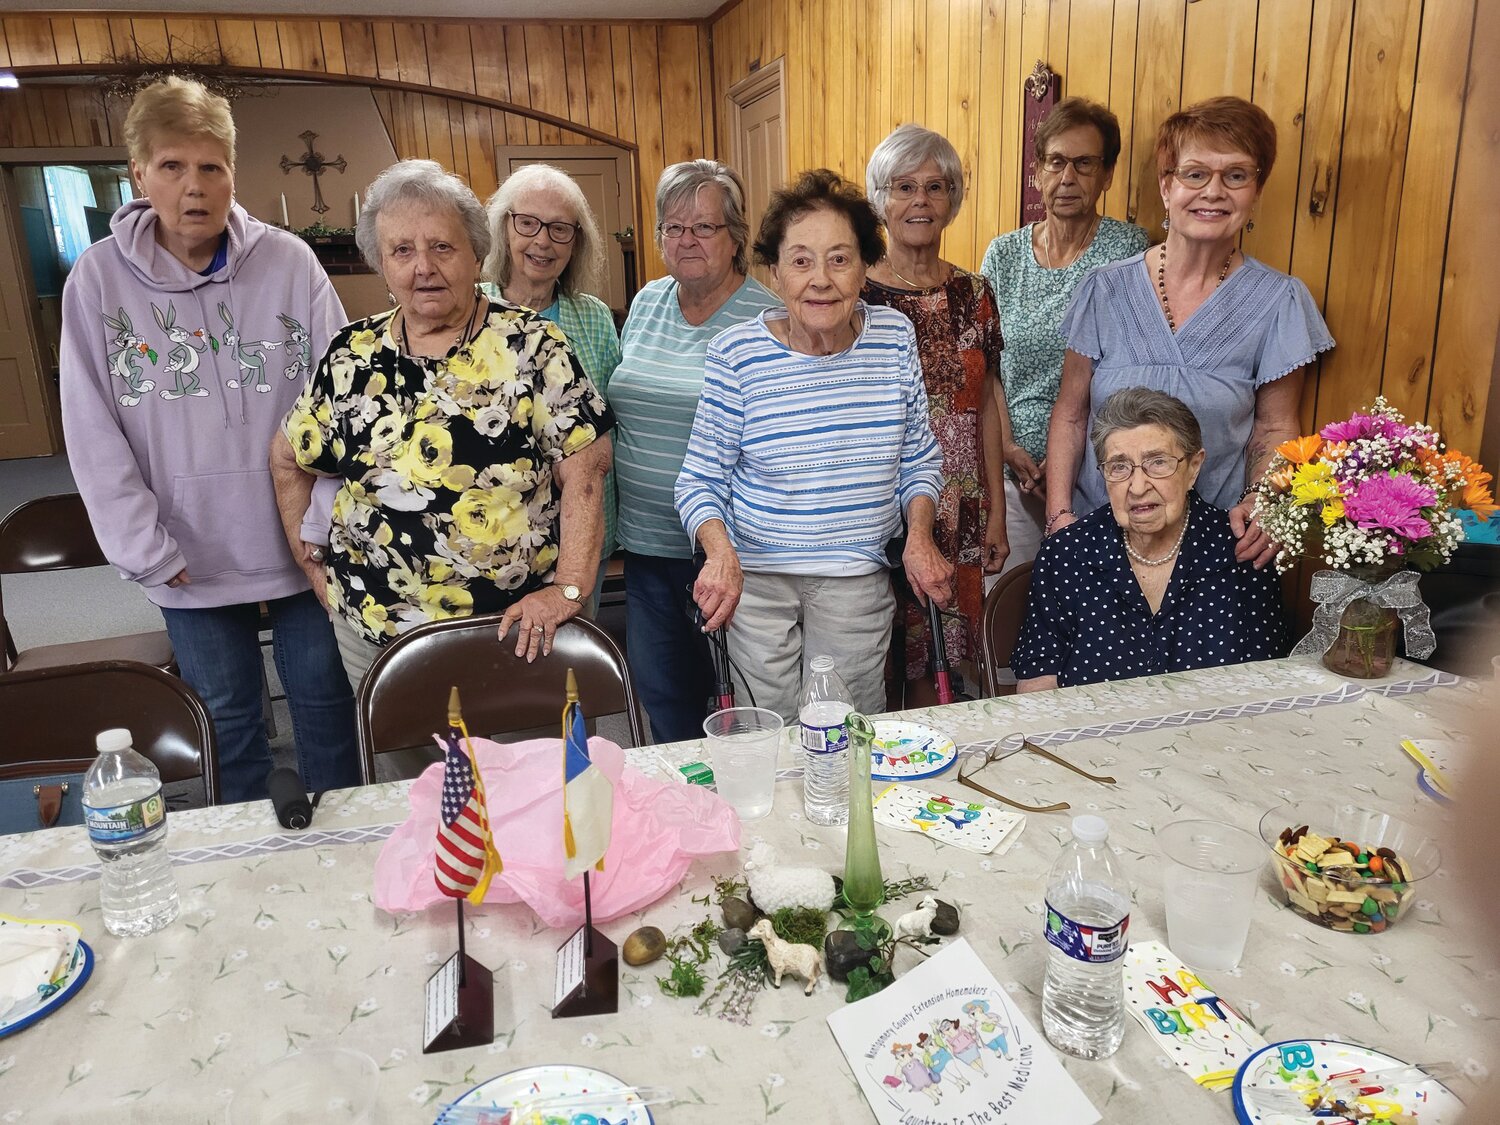 Those pictured in the picture are Carol Crowder, Rita Kirkpatrick, Eileen Matricia, Linda Miller, Betty Jeffers, Judy Tulley, Sandra Lightle, Carol Vice and the birthday girl, Claudine Whalen.